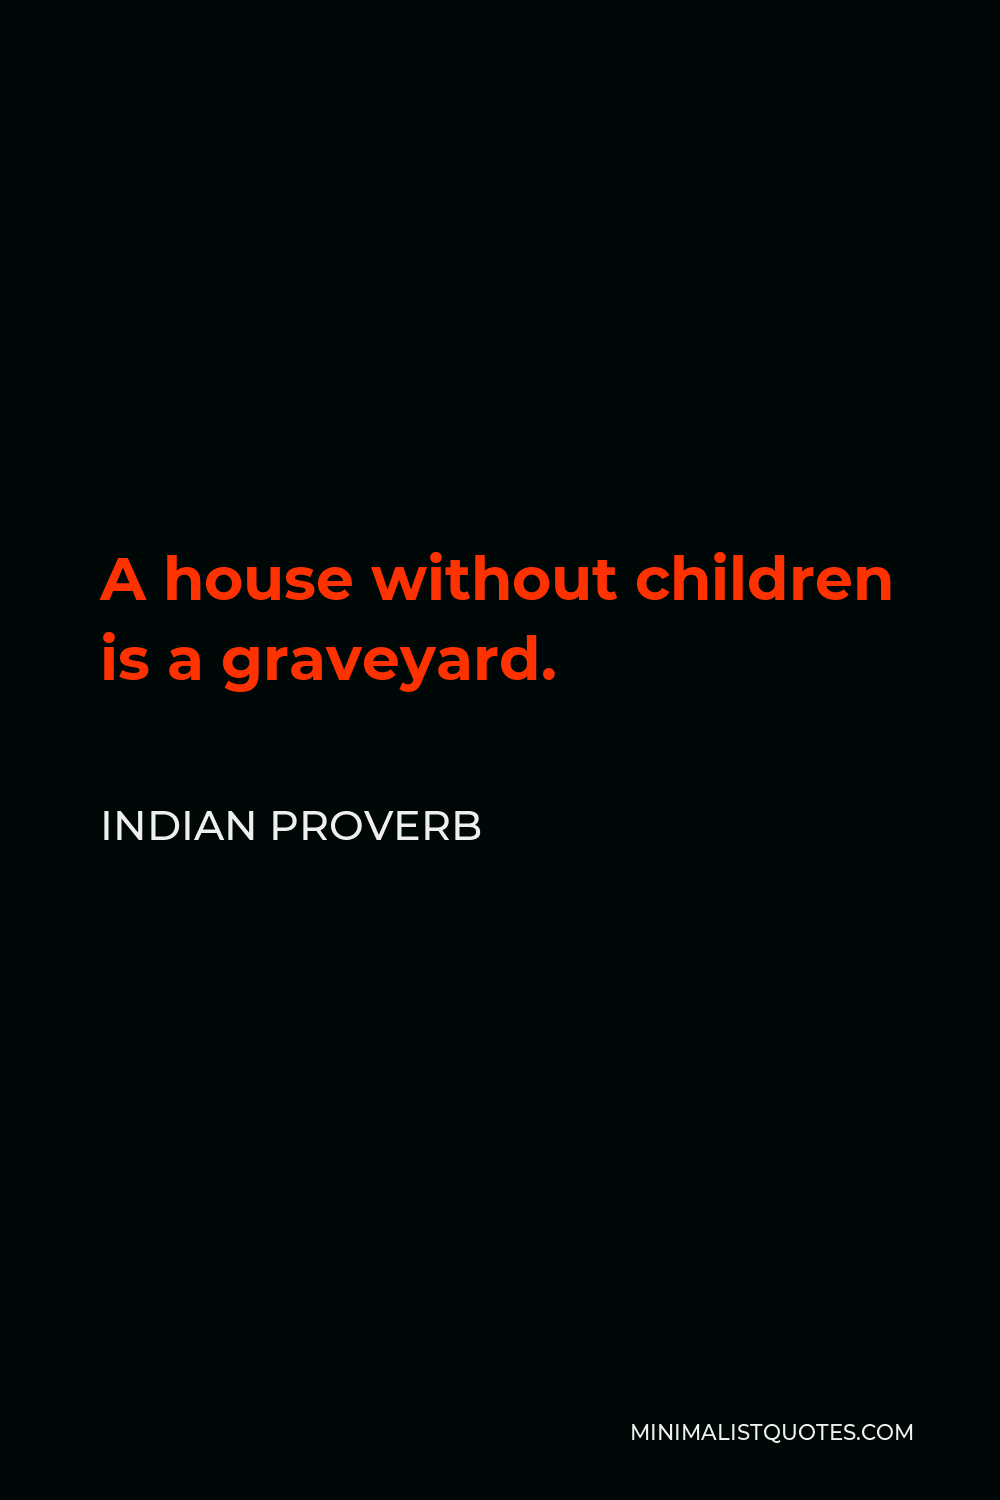 Indian Proverb Quote - A house without children is a graveyard.